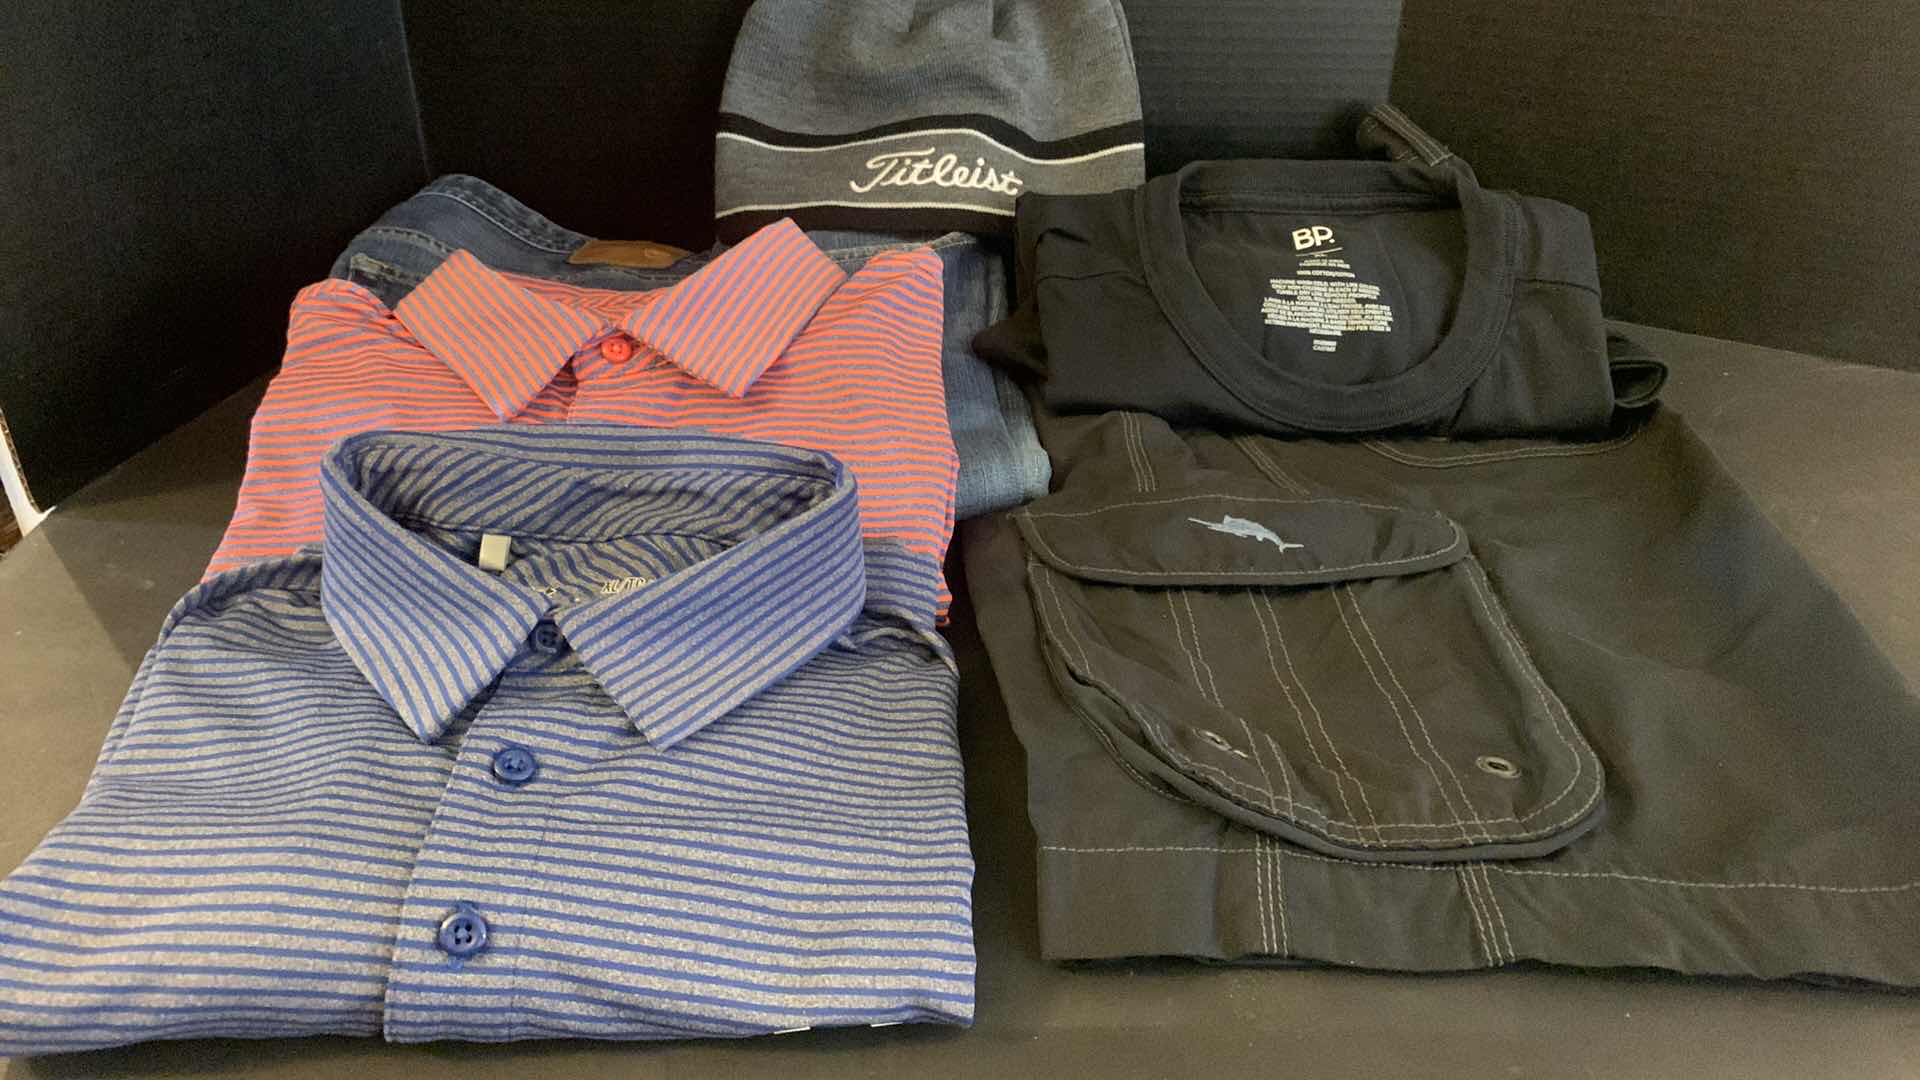 Photo 1 of MENS CLOTHING COLLECTION, SIZE XL, TOMMY BAHAMA, UNDER ARMOR AND MORE